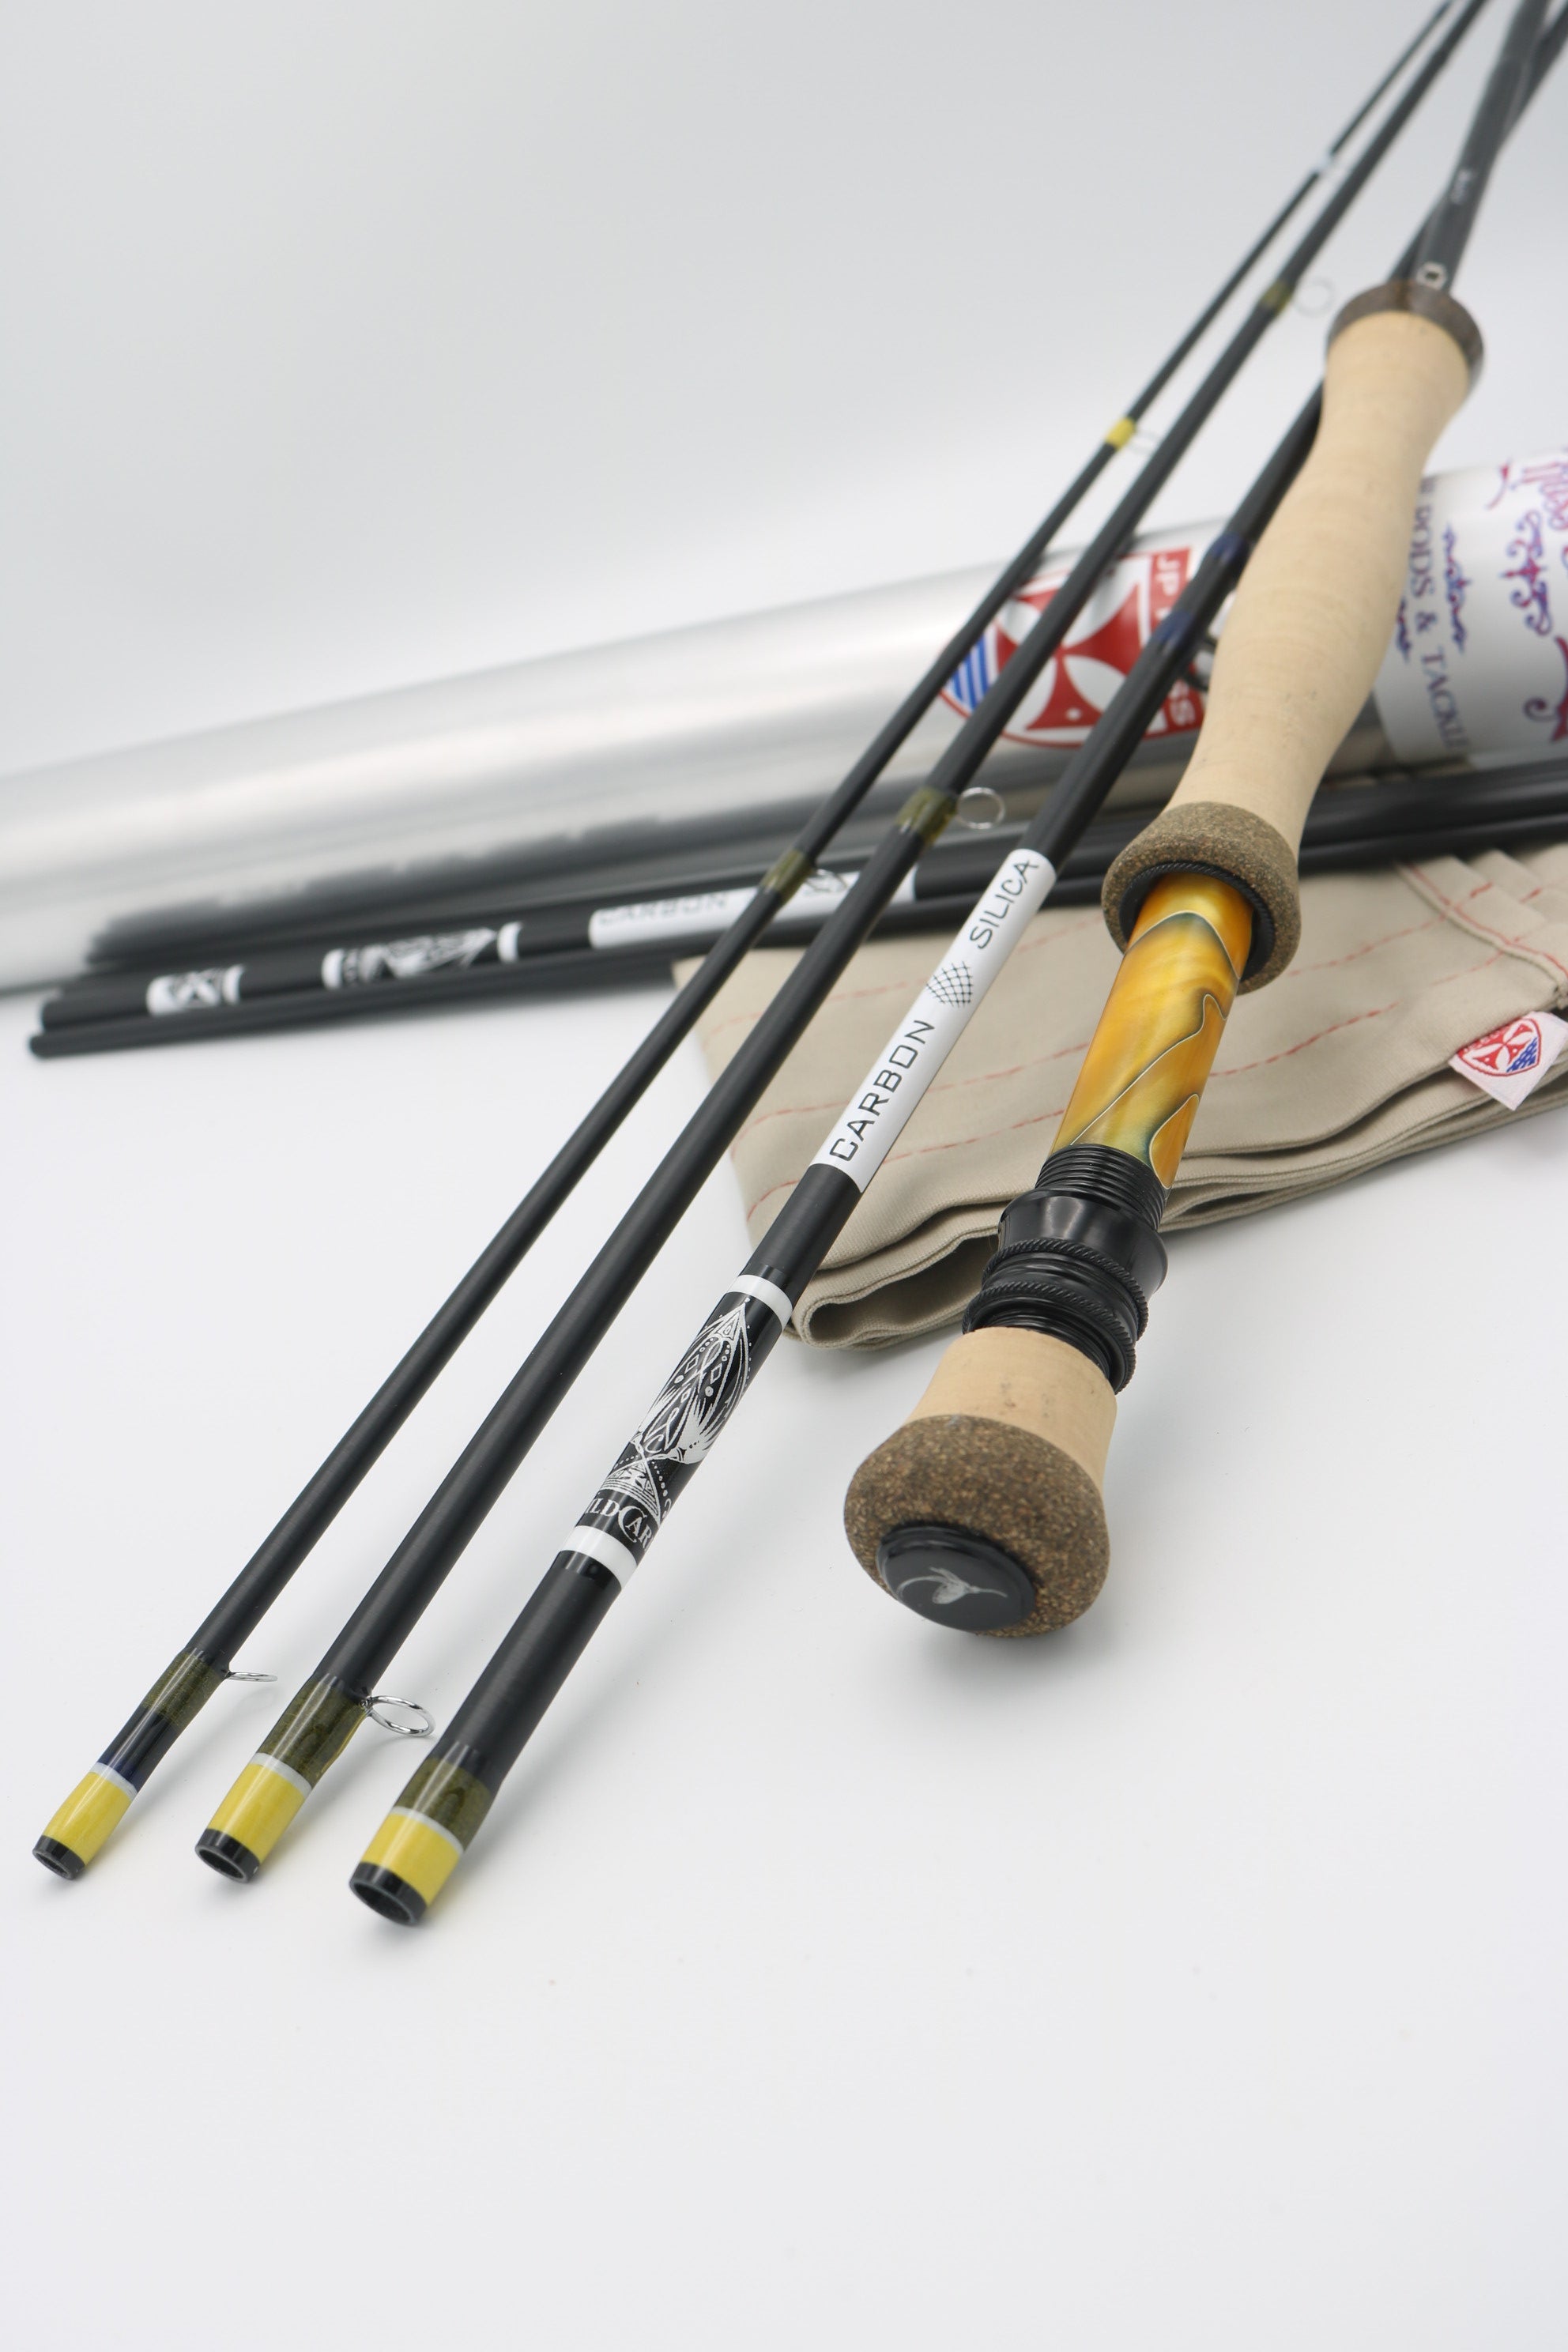 7 foot 5 wt 4 pc WILD CARD Carbon & Glass Hybrid fly rod